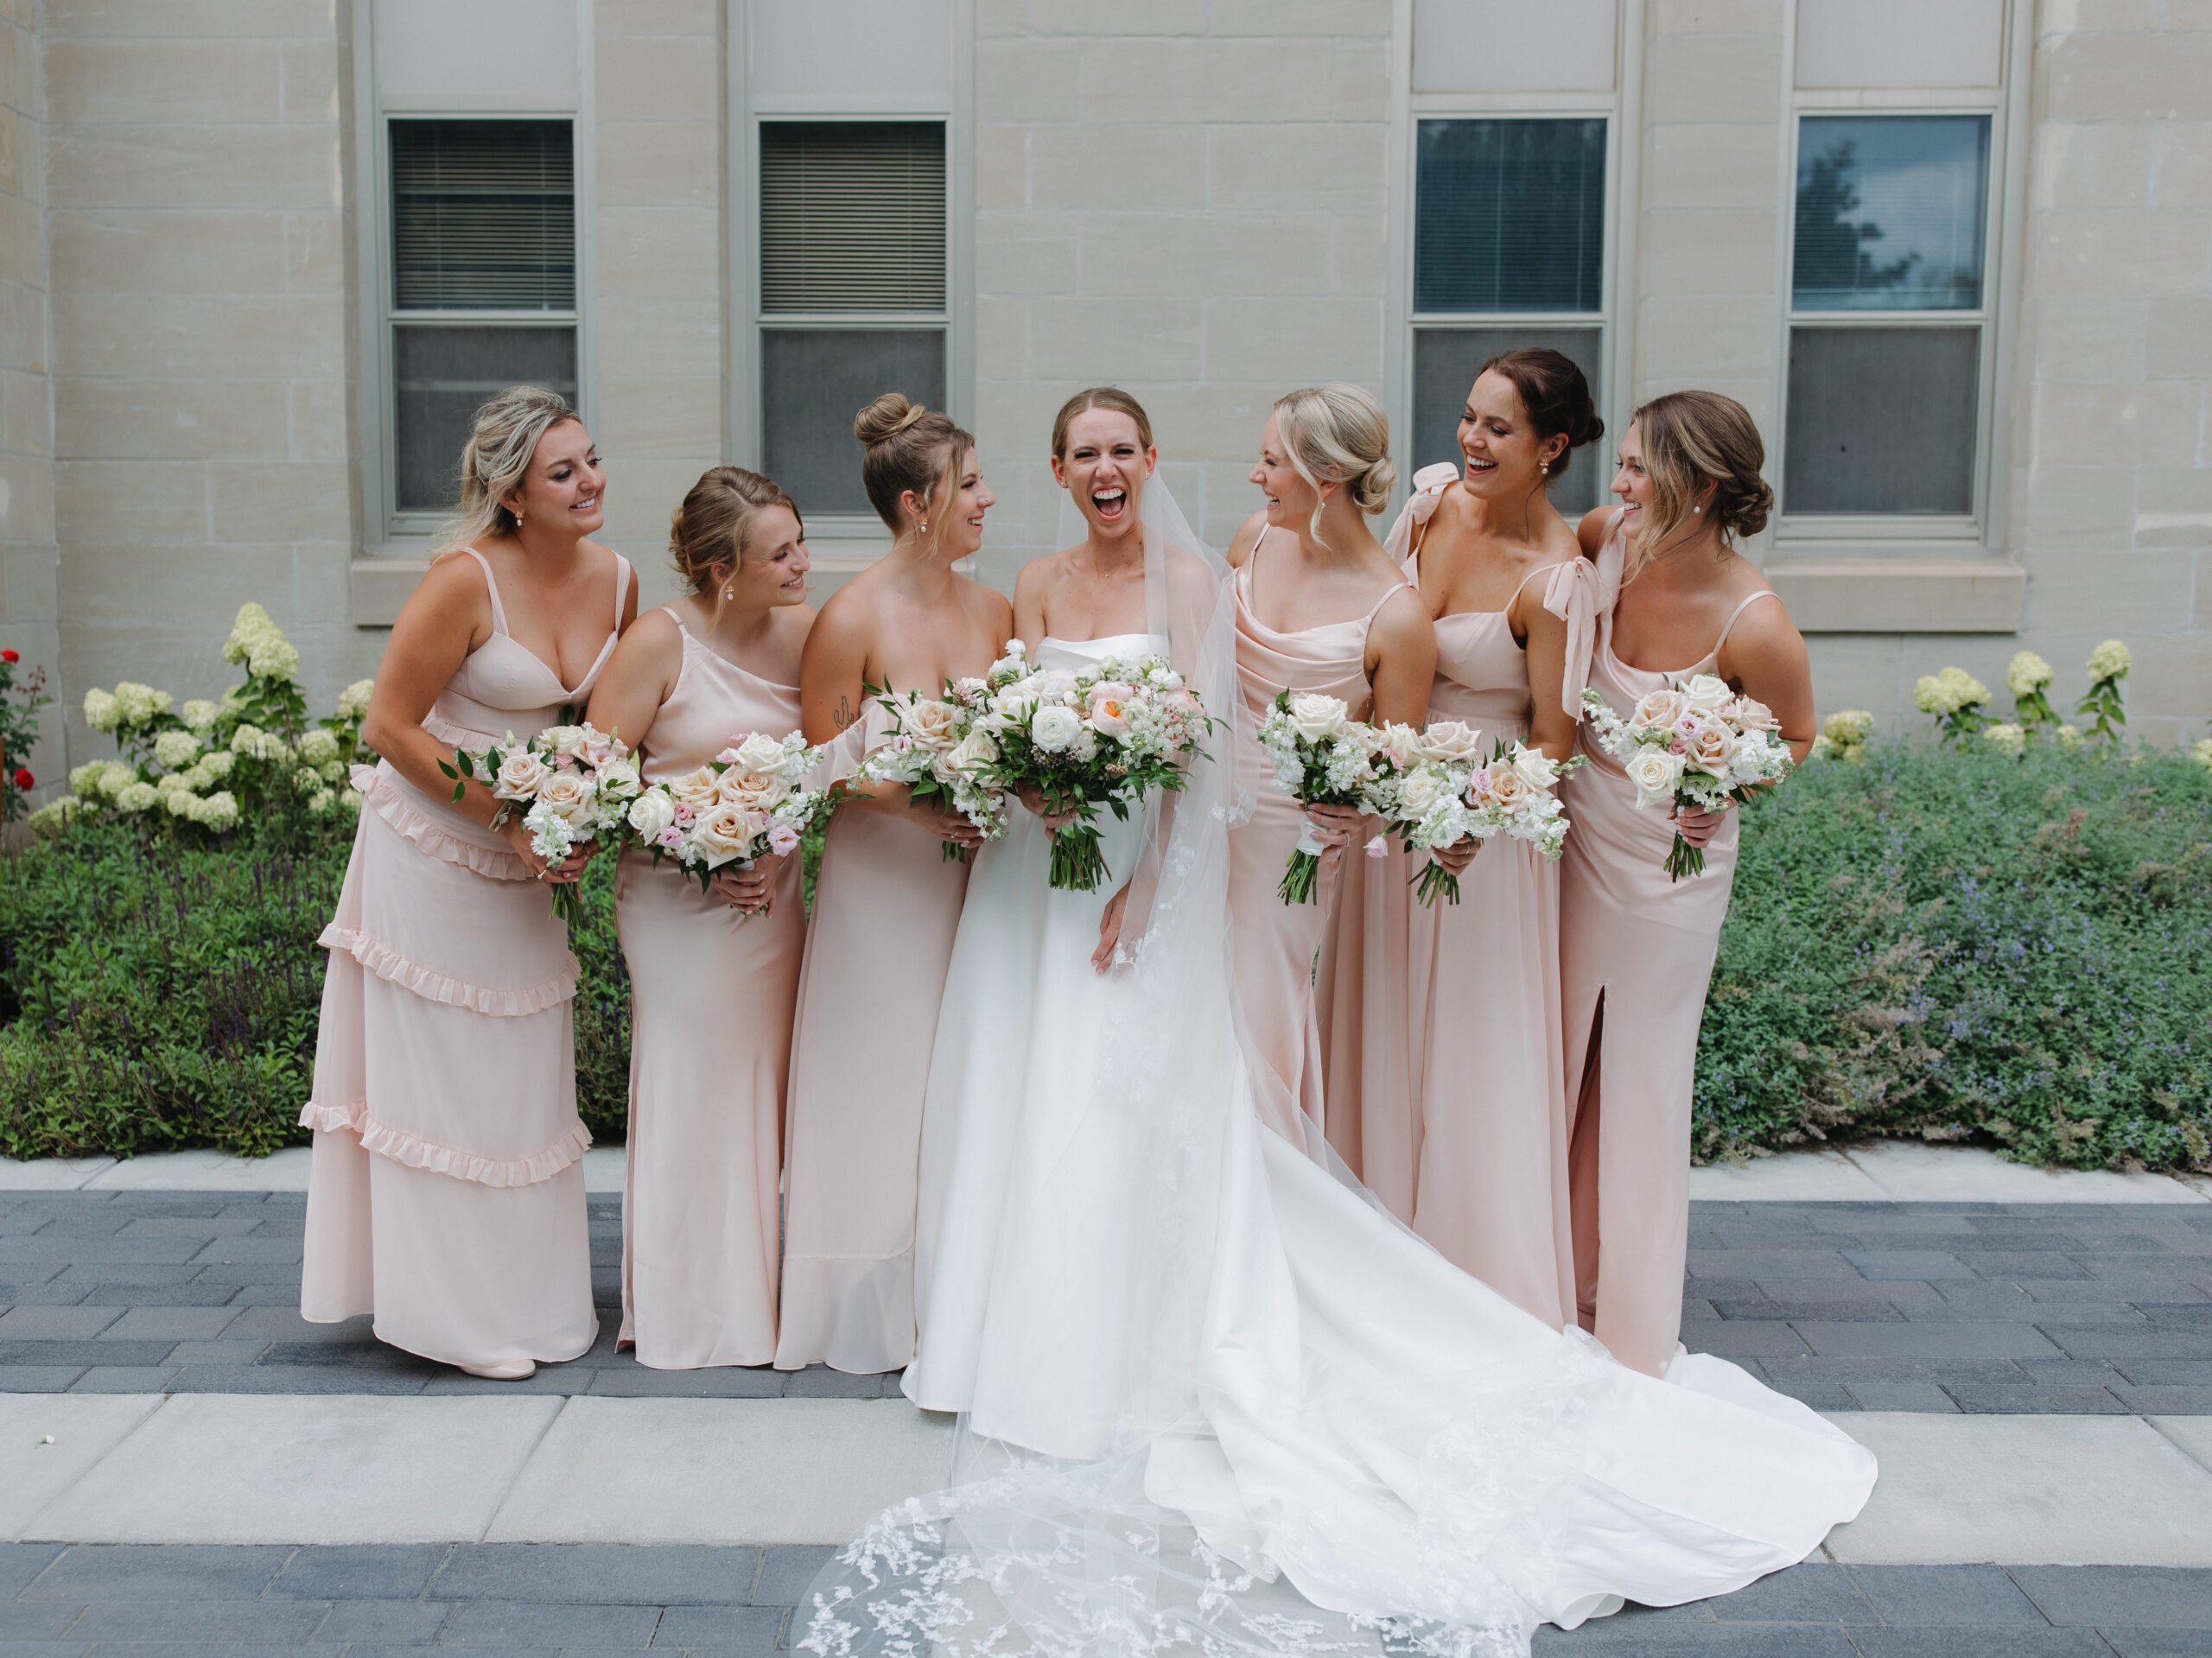 The bride and her bridesmaids on Creighton University campus